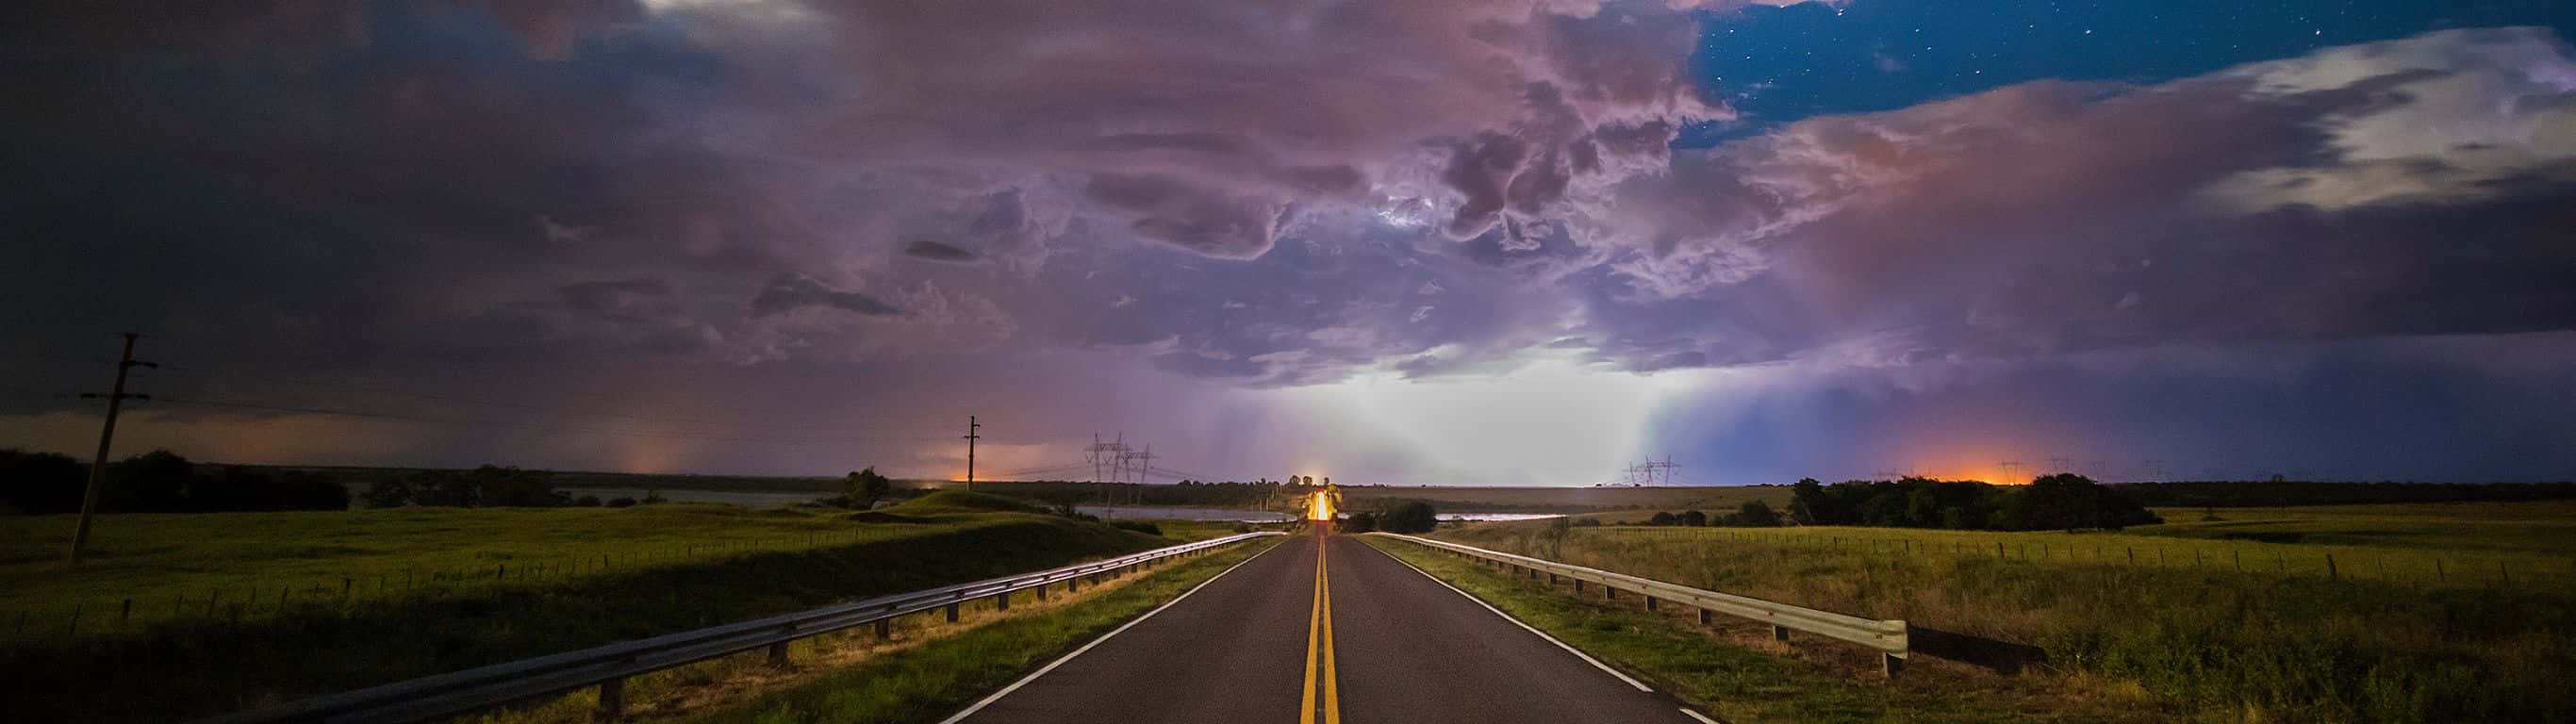 Lightning Over A Road With A Cloudy Sky Wallpaper